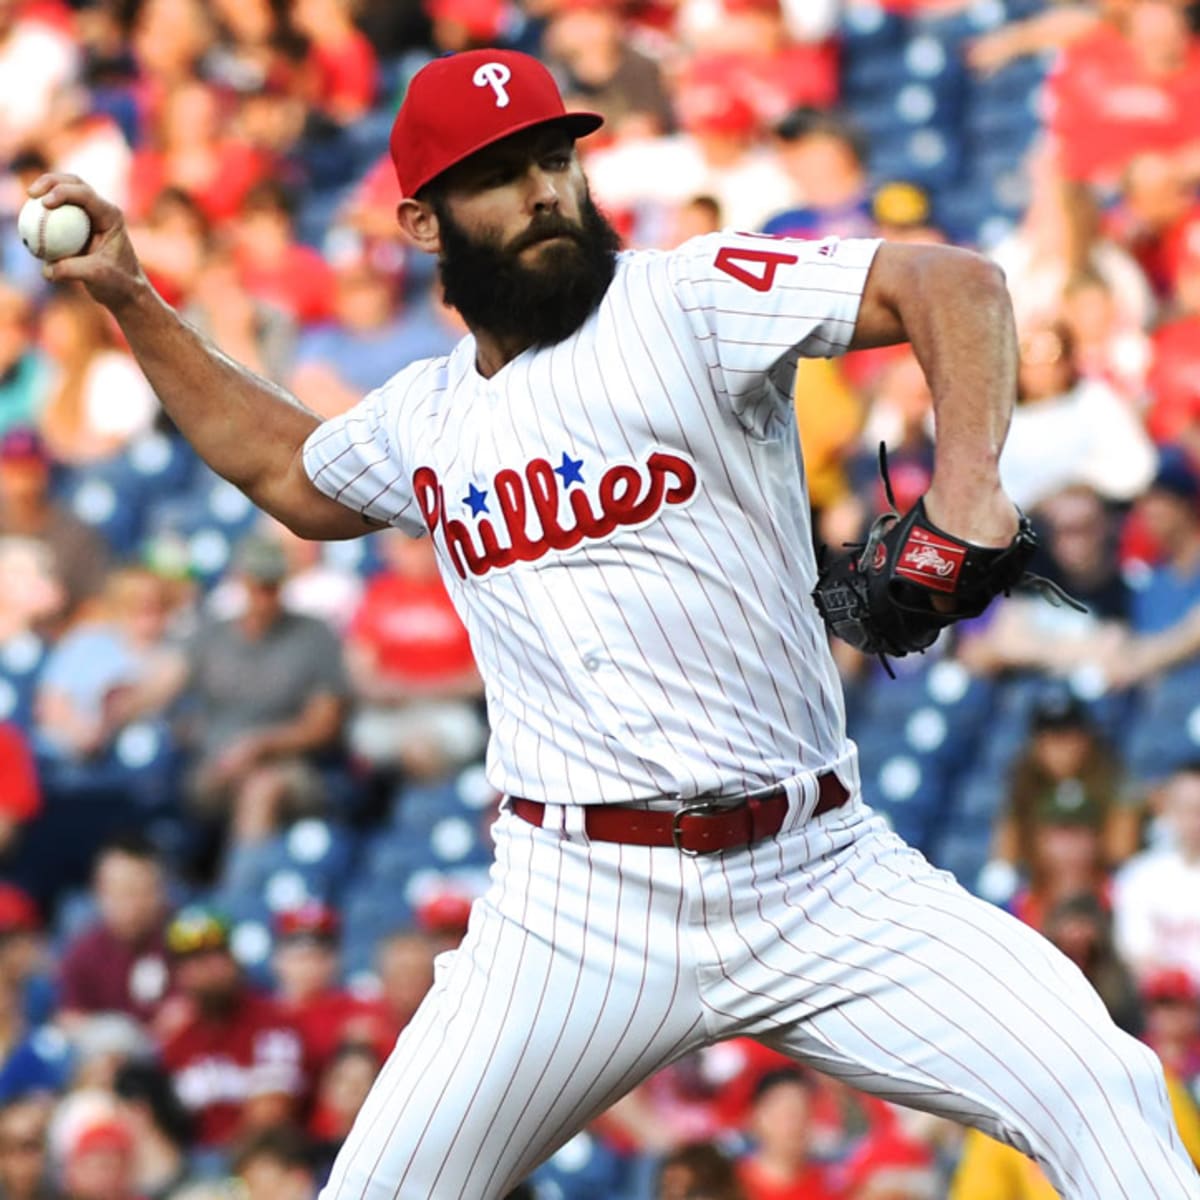 MLB free agency: Phillies interested in Jake Arrieta on 3-year deal - MLB  Daily Dish